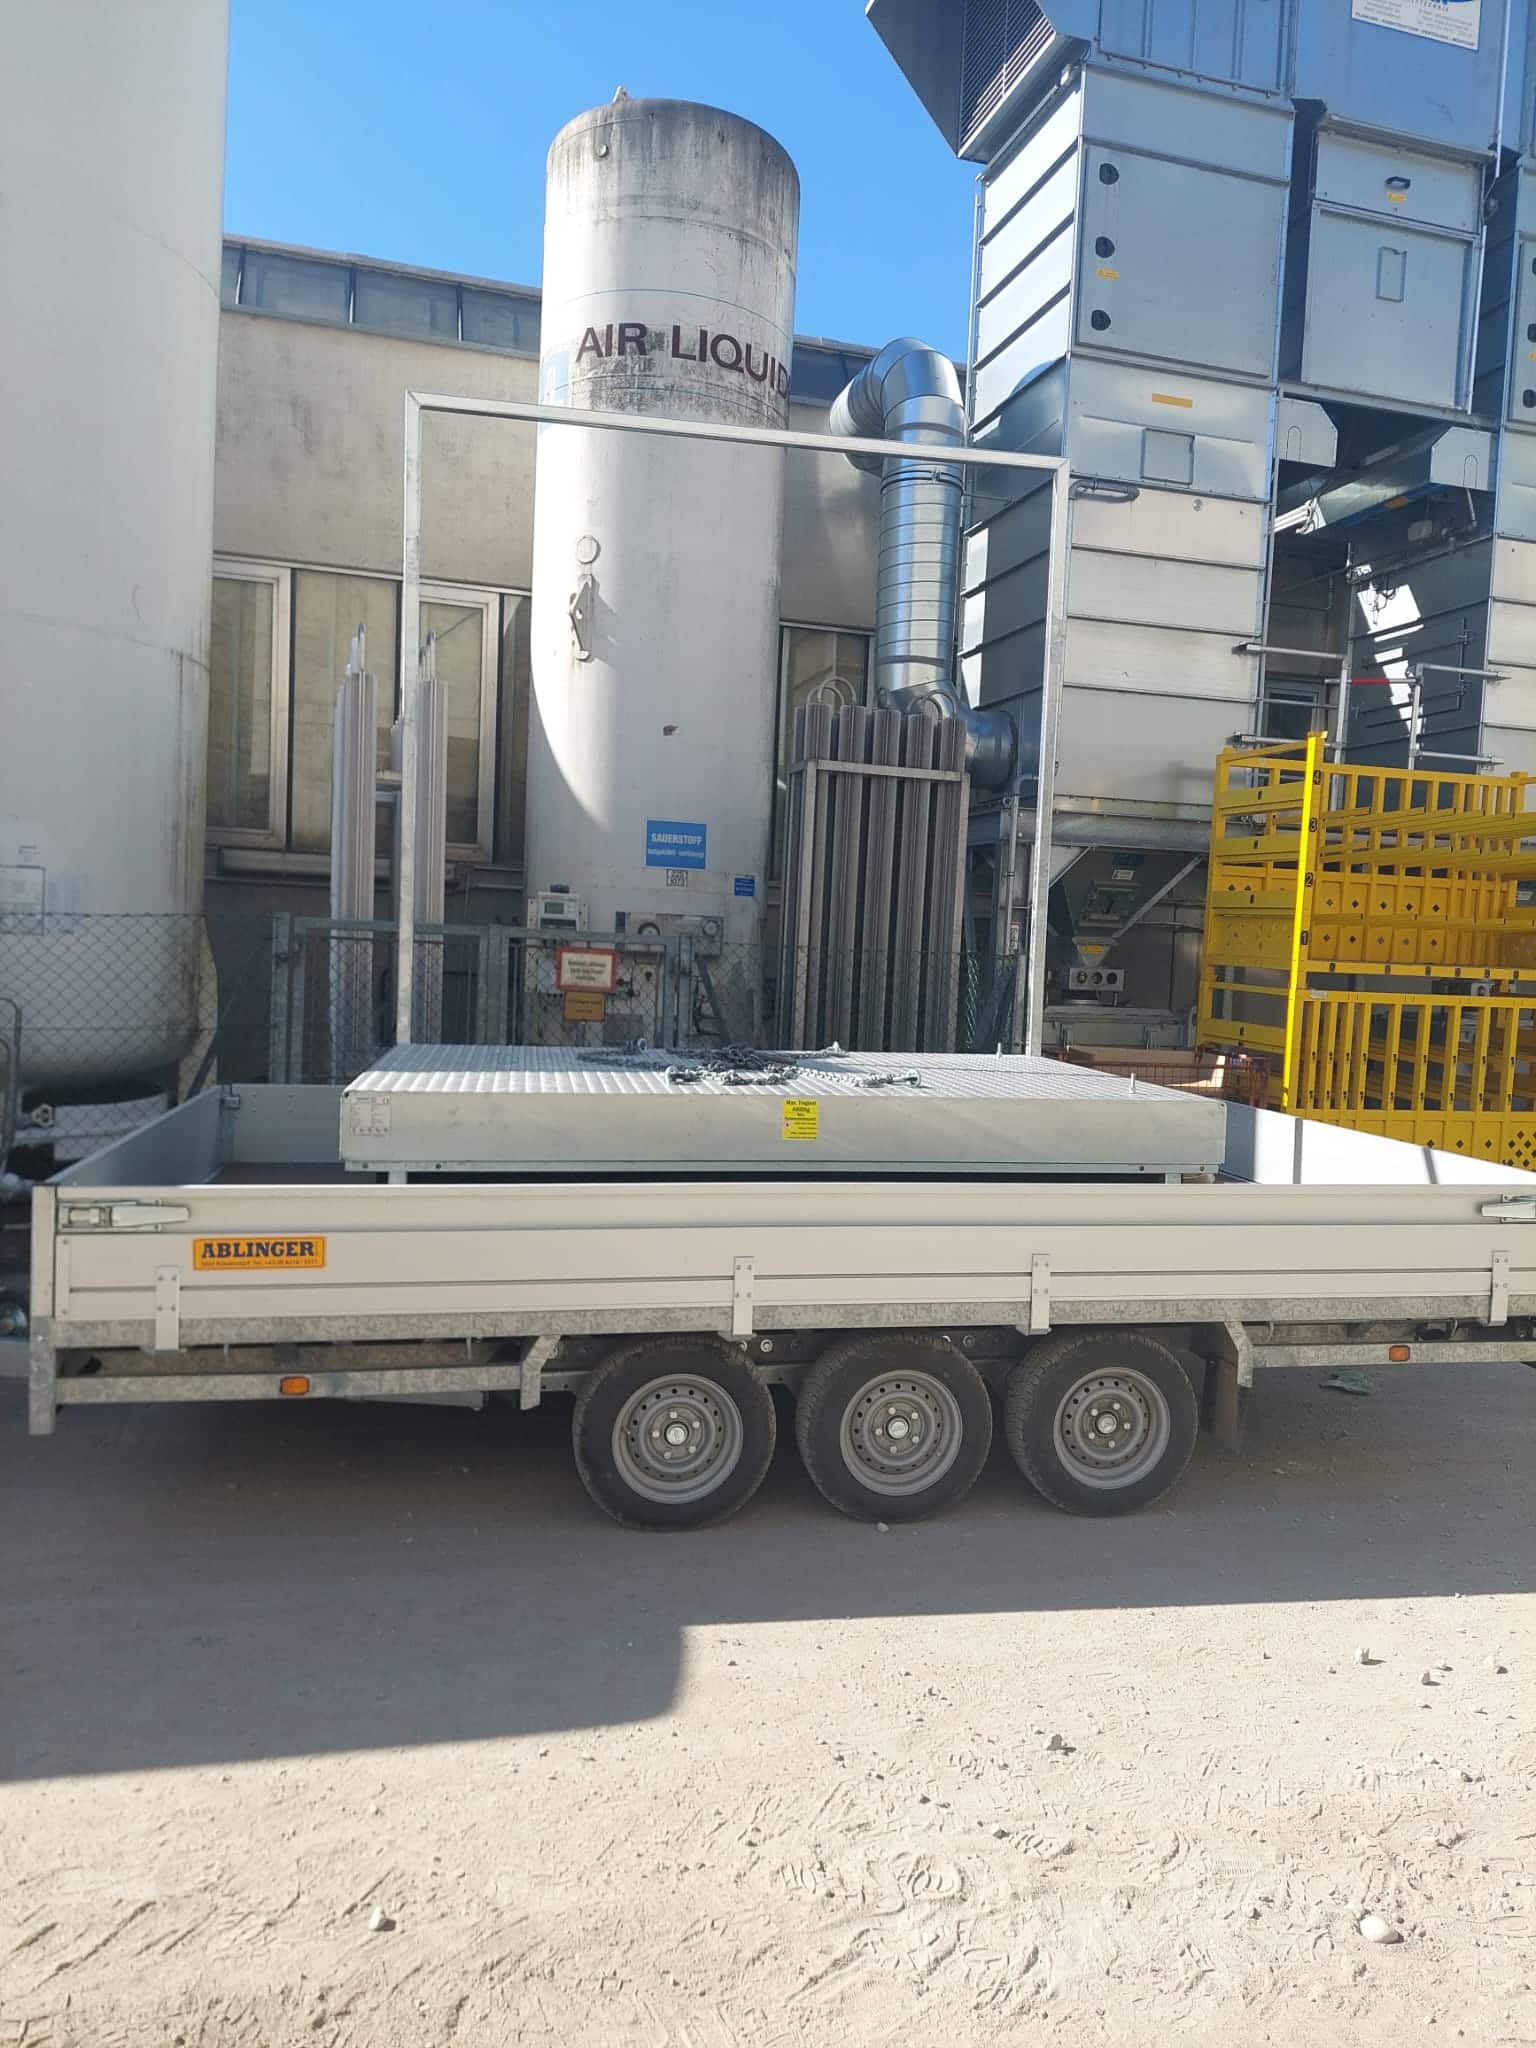 Delivery from the loading lifting table